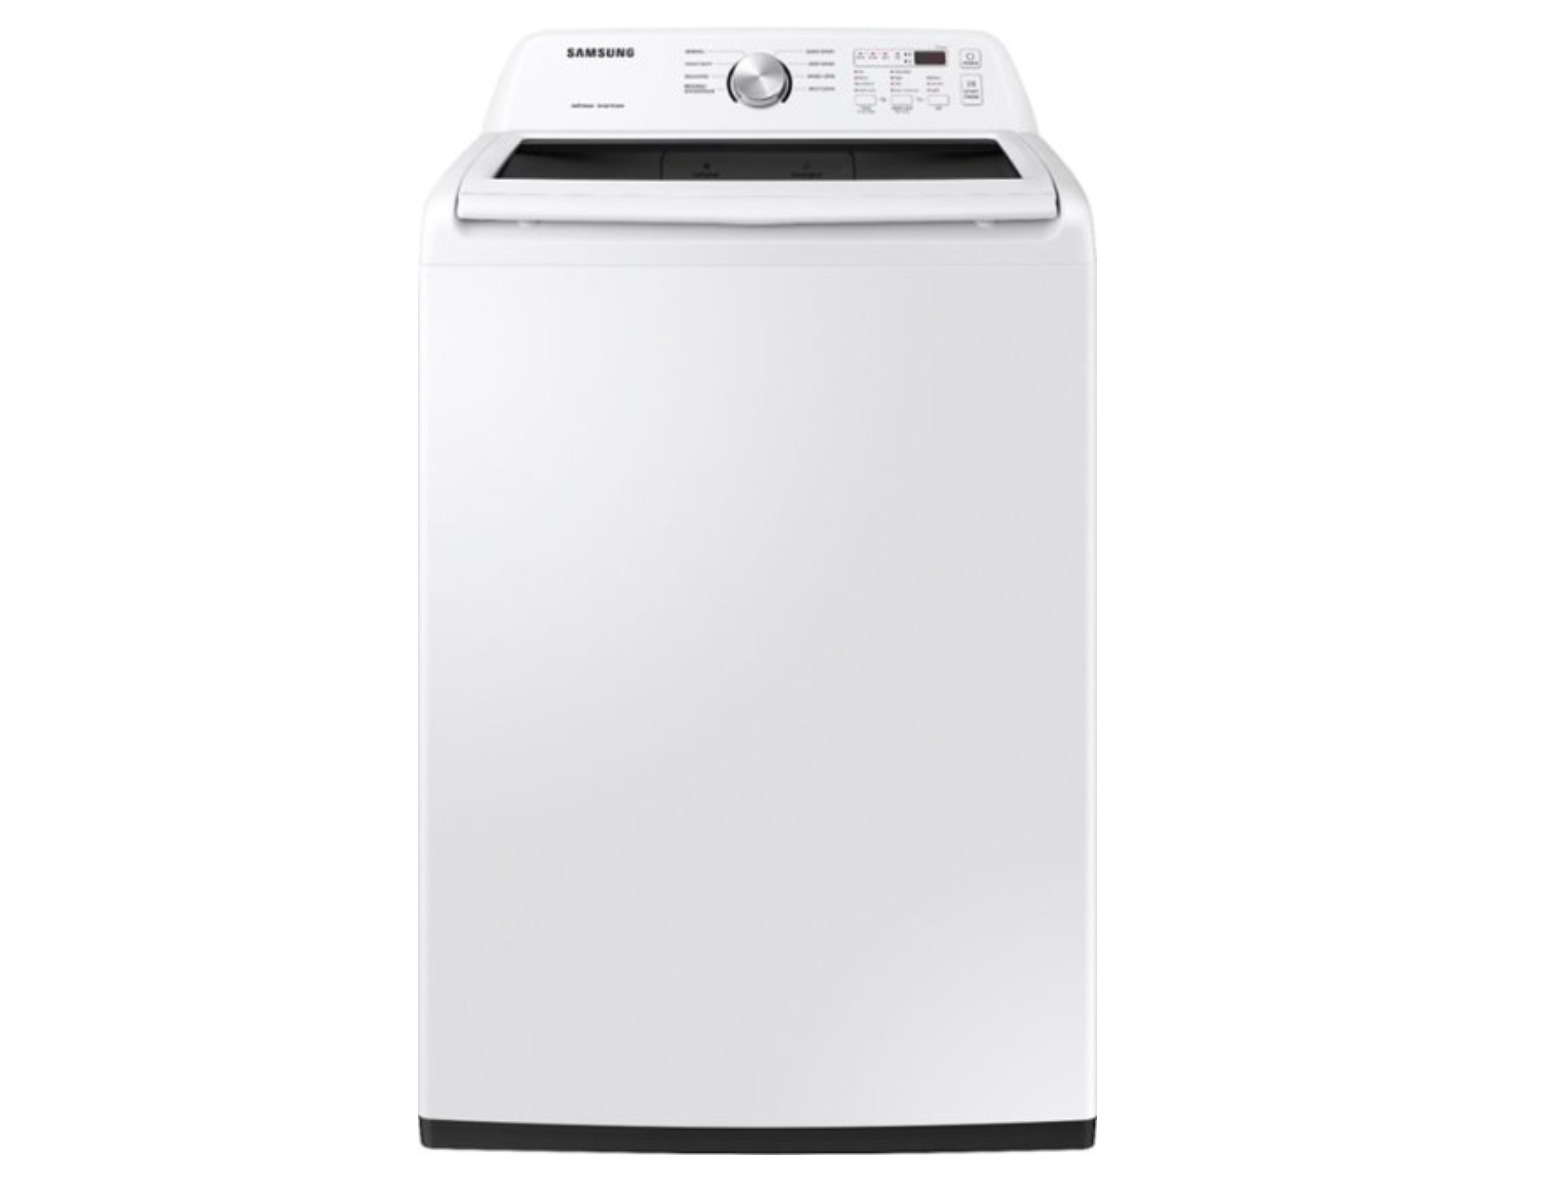 Samsung 4.5 cubic foot High-Efficiency Top Load Washer